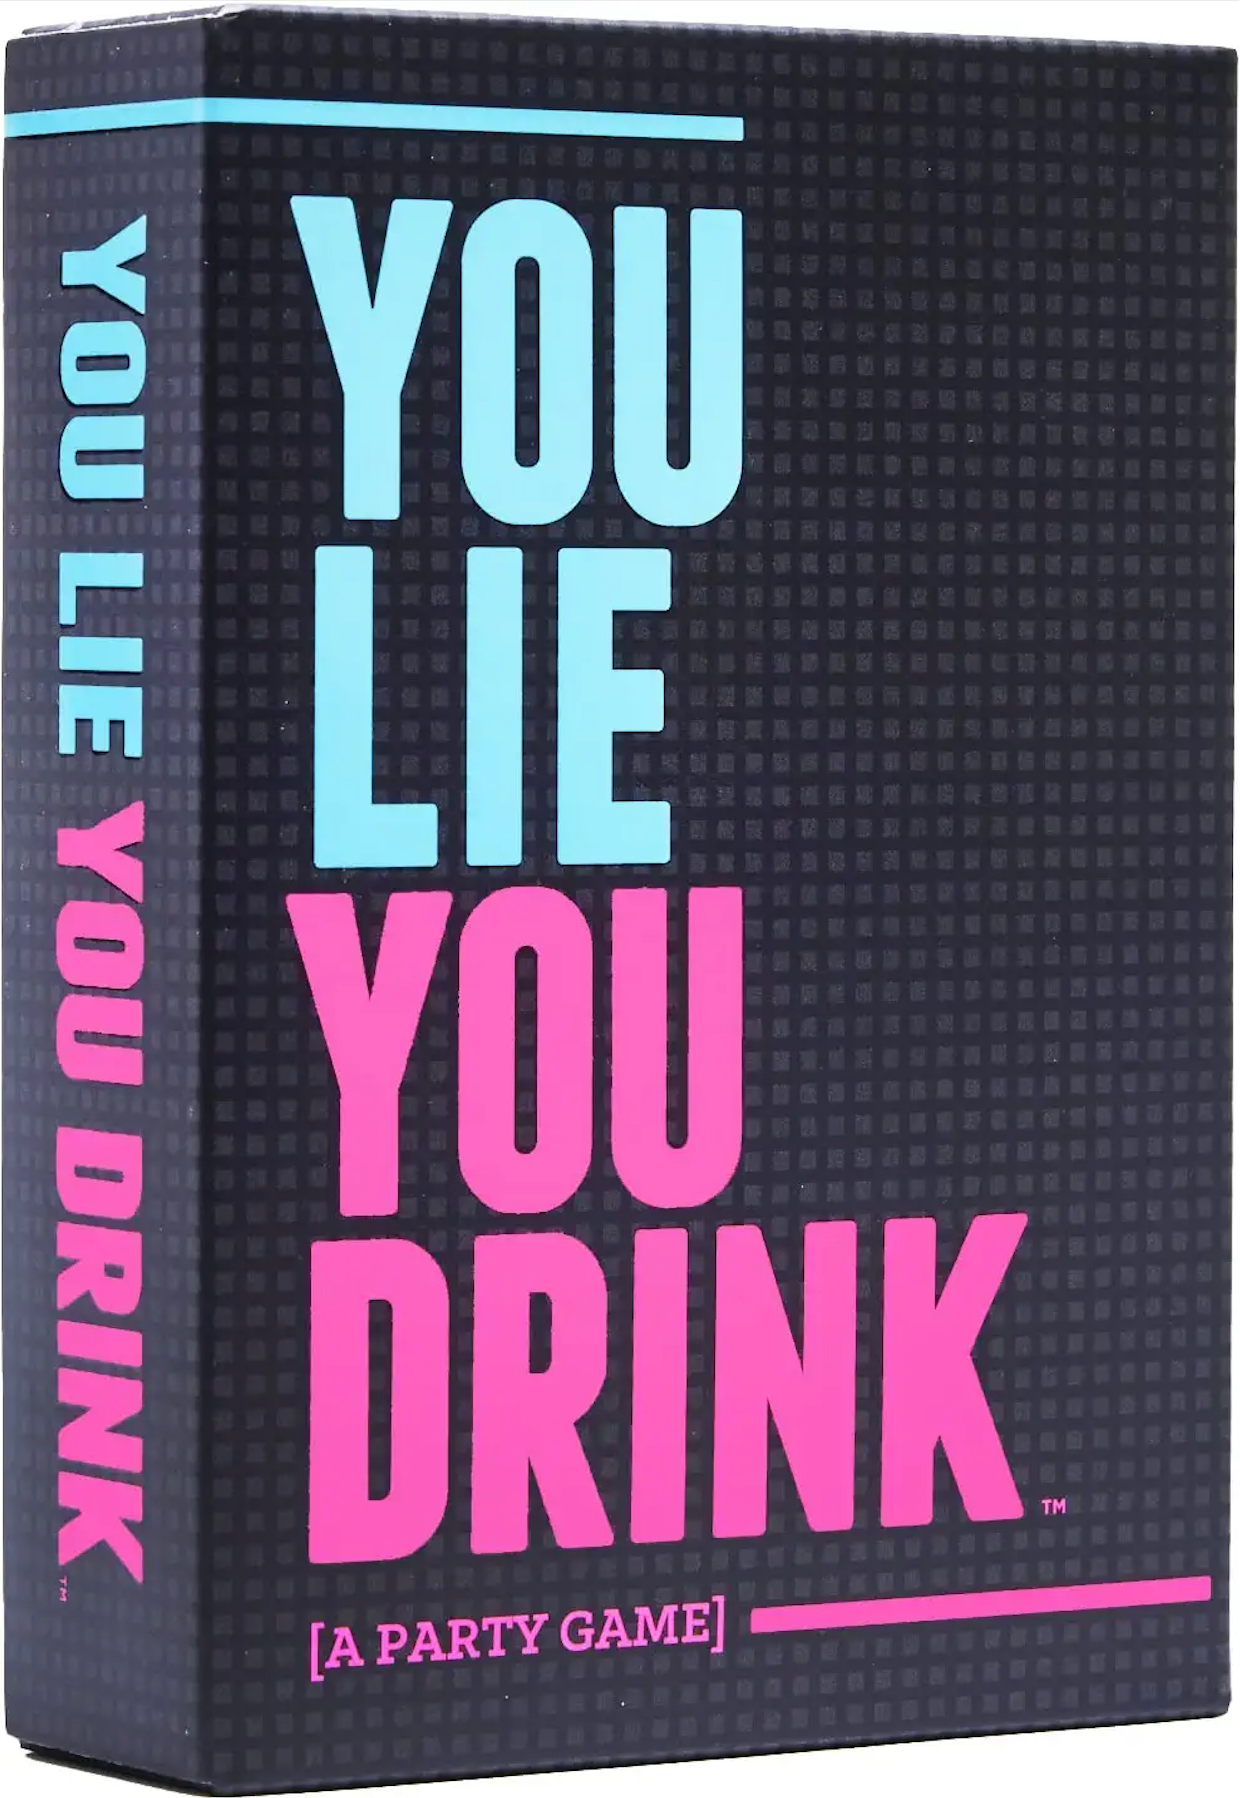 You Lie You Drink